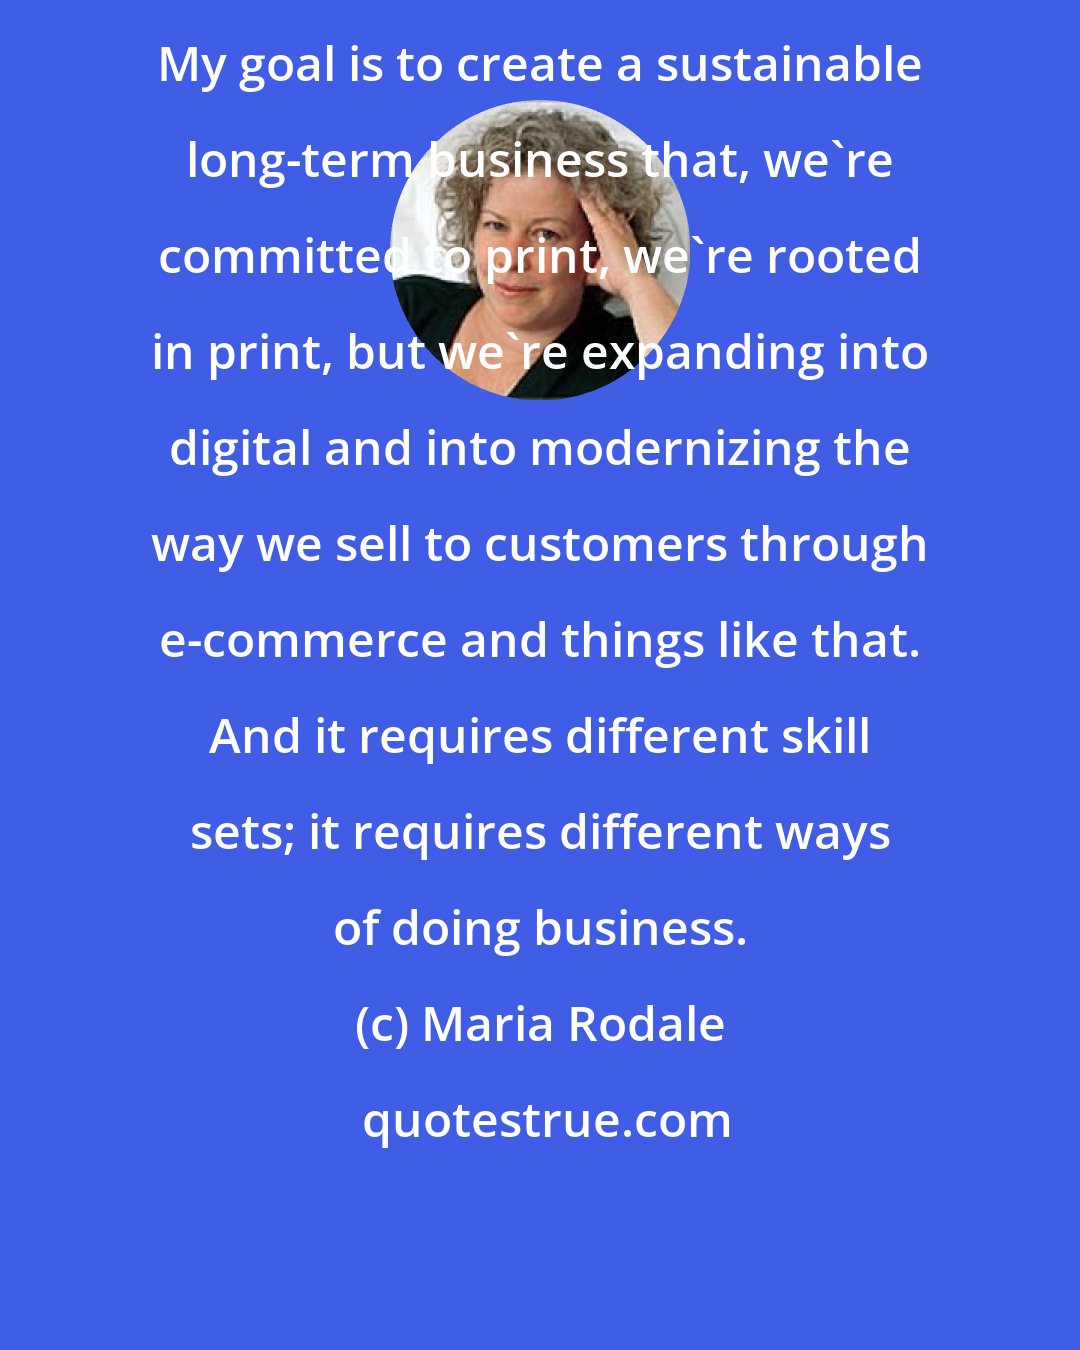 Maria Rodale: My goal is to create a sustainable long-term business that, we're committed to print, we're rooted in print, but we're expanding into digital and into modernizing the way we sell to customers through e-commerce and things like that. And it requires different skill sets; it requires different ways of doing business.